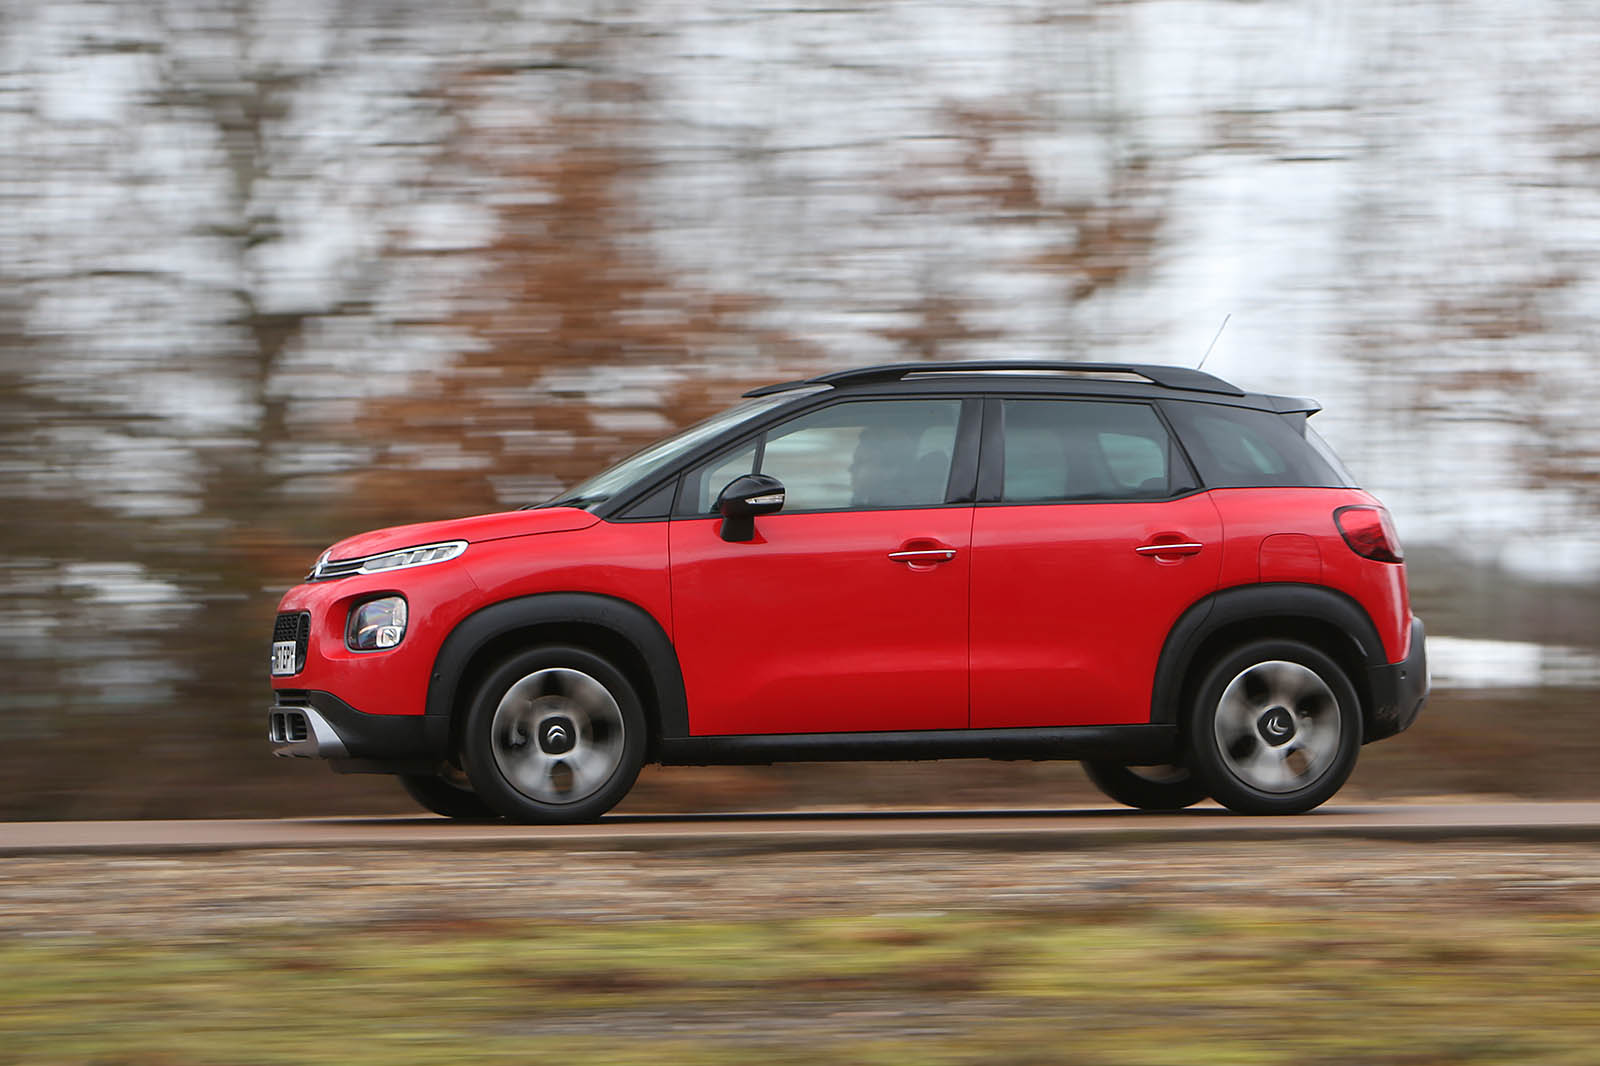 Citroen C3 Aircross 2018 review on the road left side